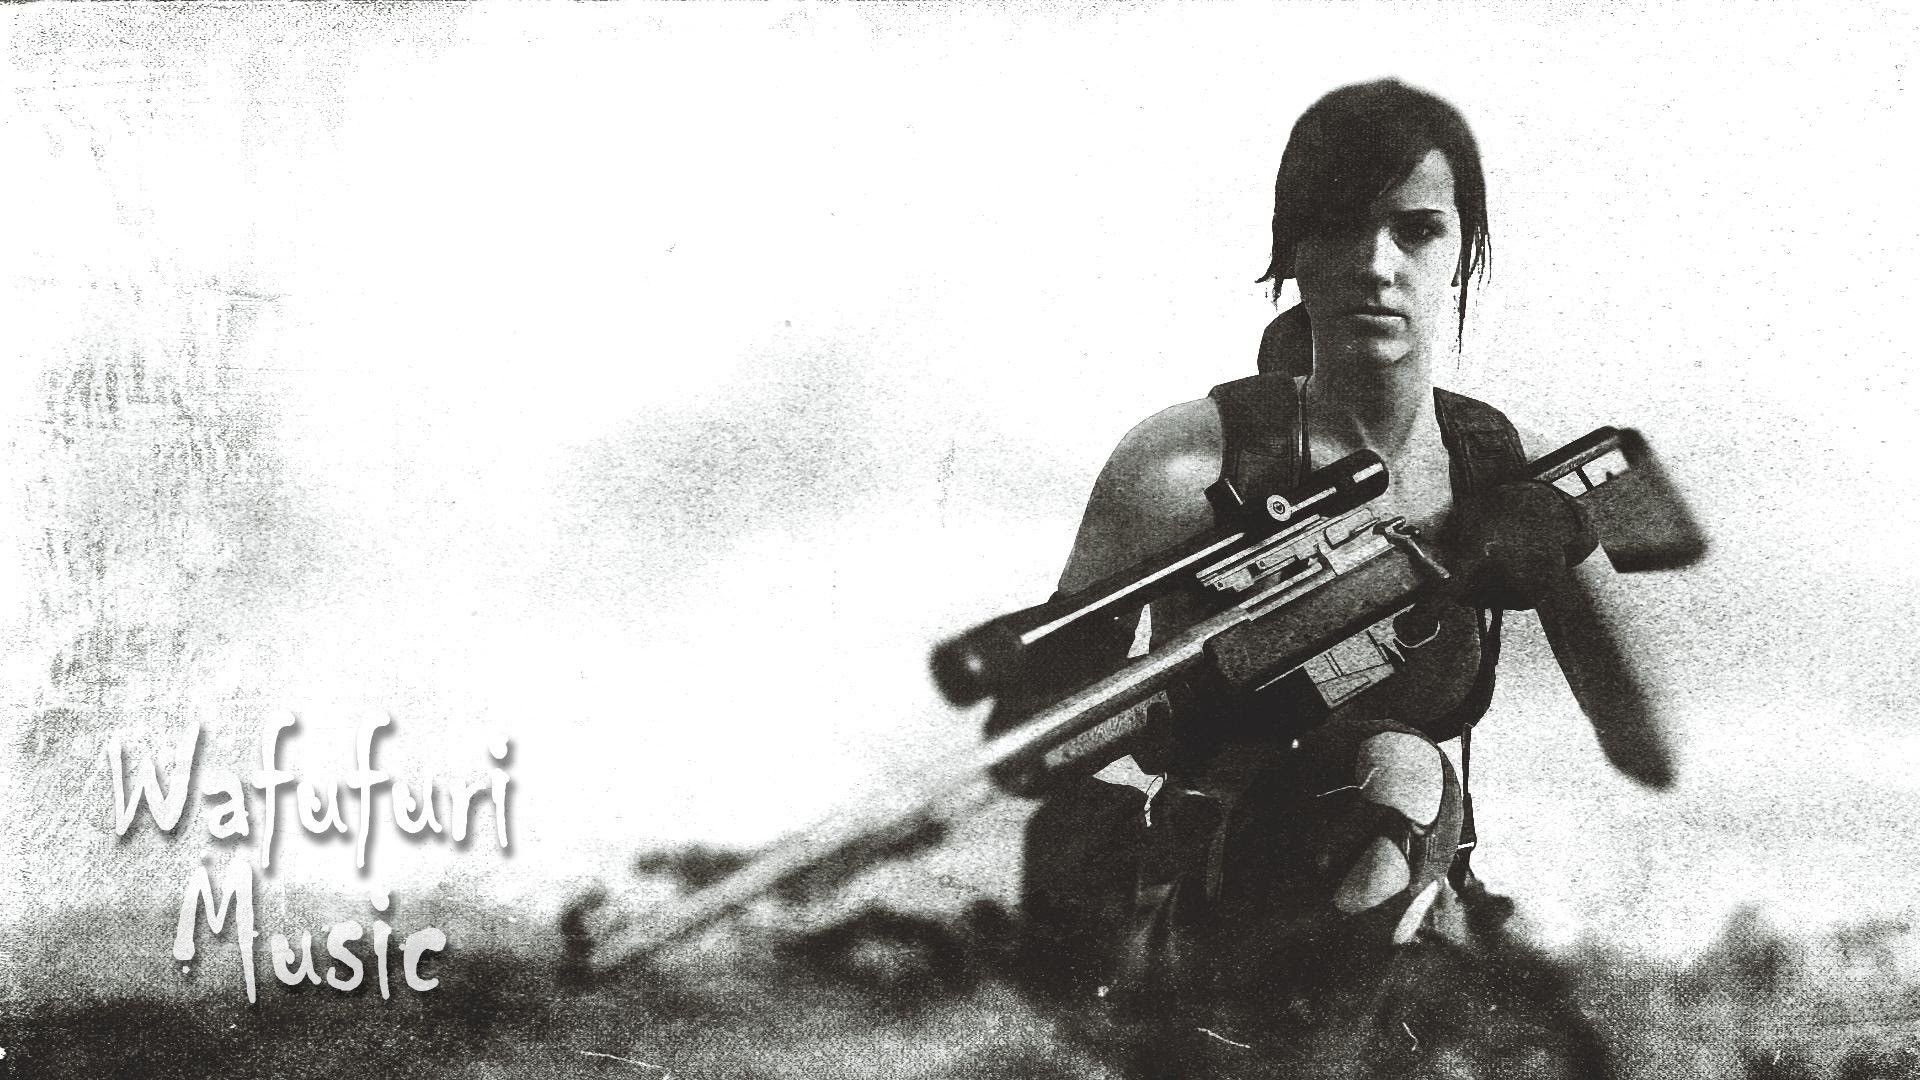 Quiet Mgs Wallpaper Image